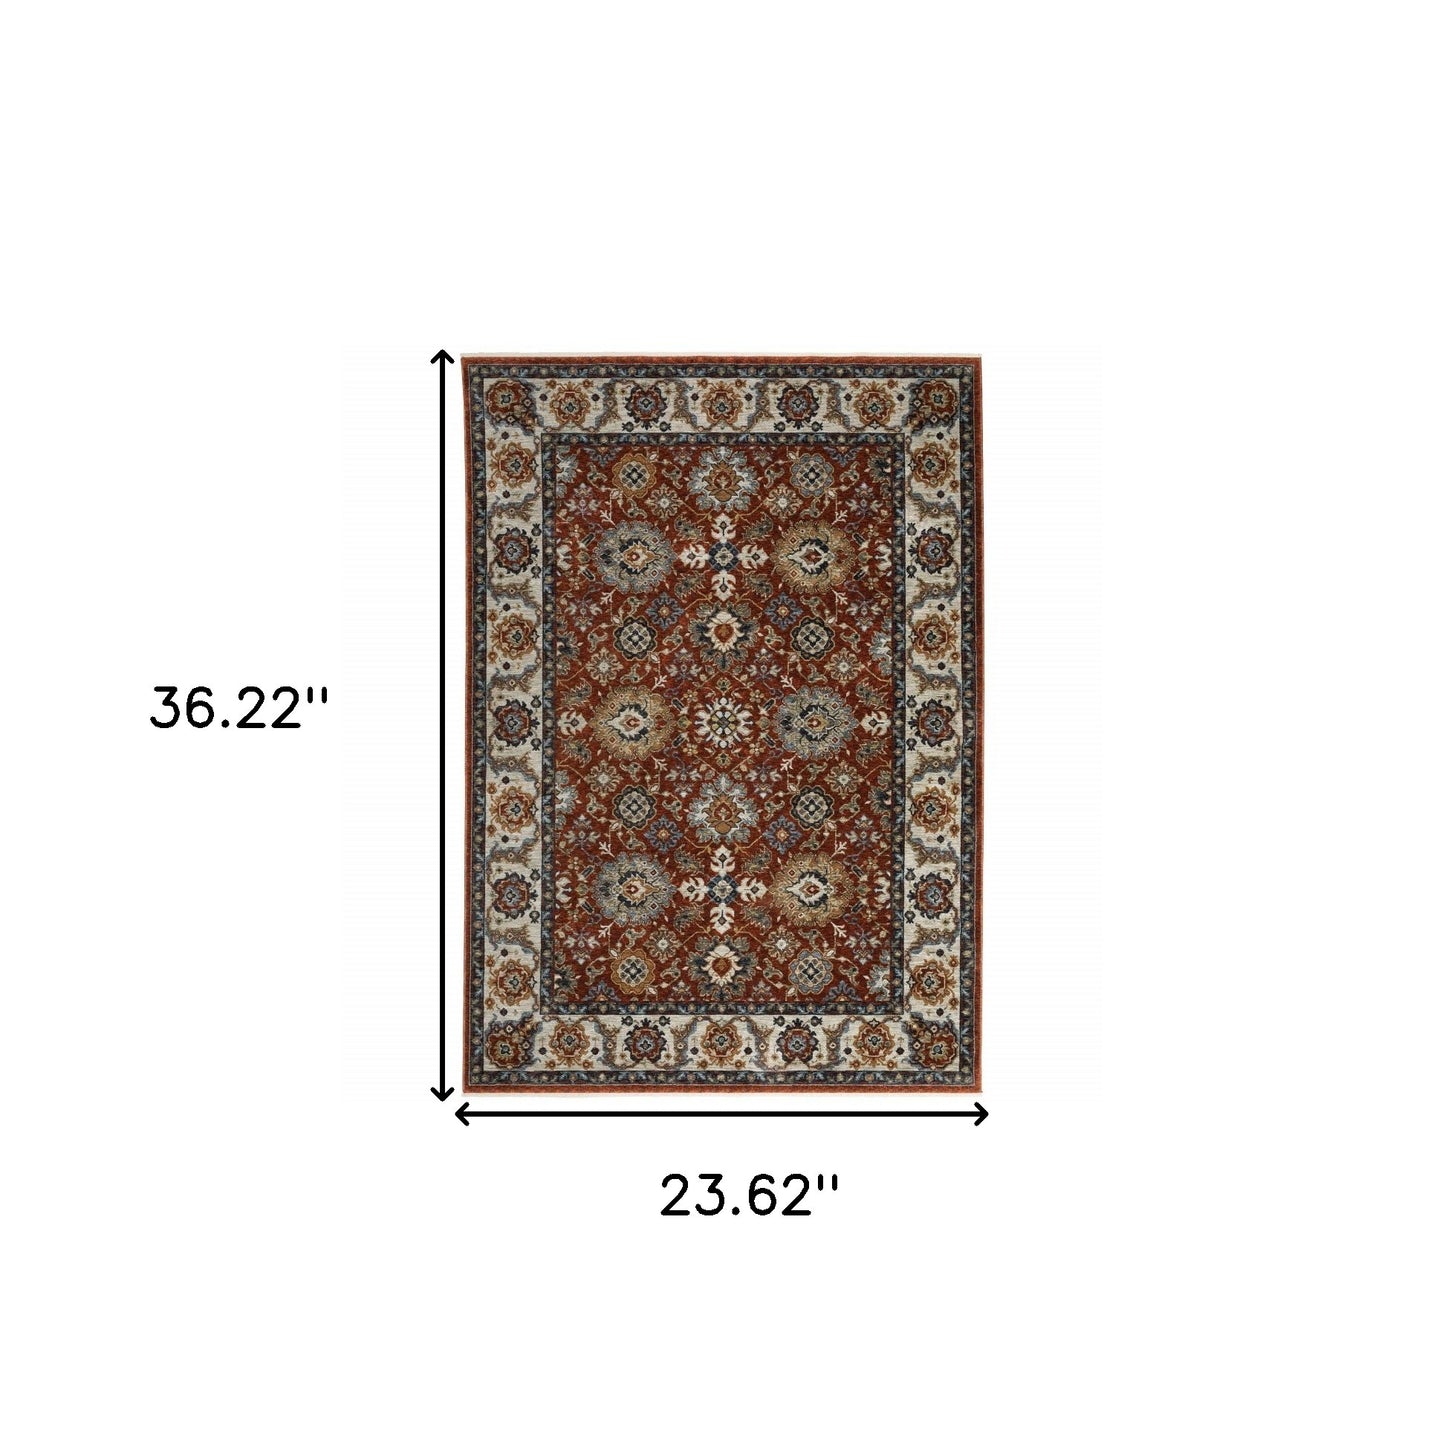 2' X 3' Red Blue Ivory Gold And Navy Oriental Power Loom Stain Resistant Area Rug With Fringe